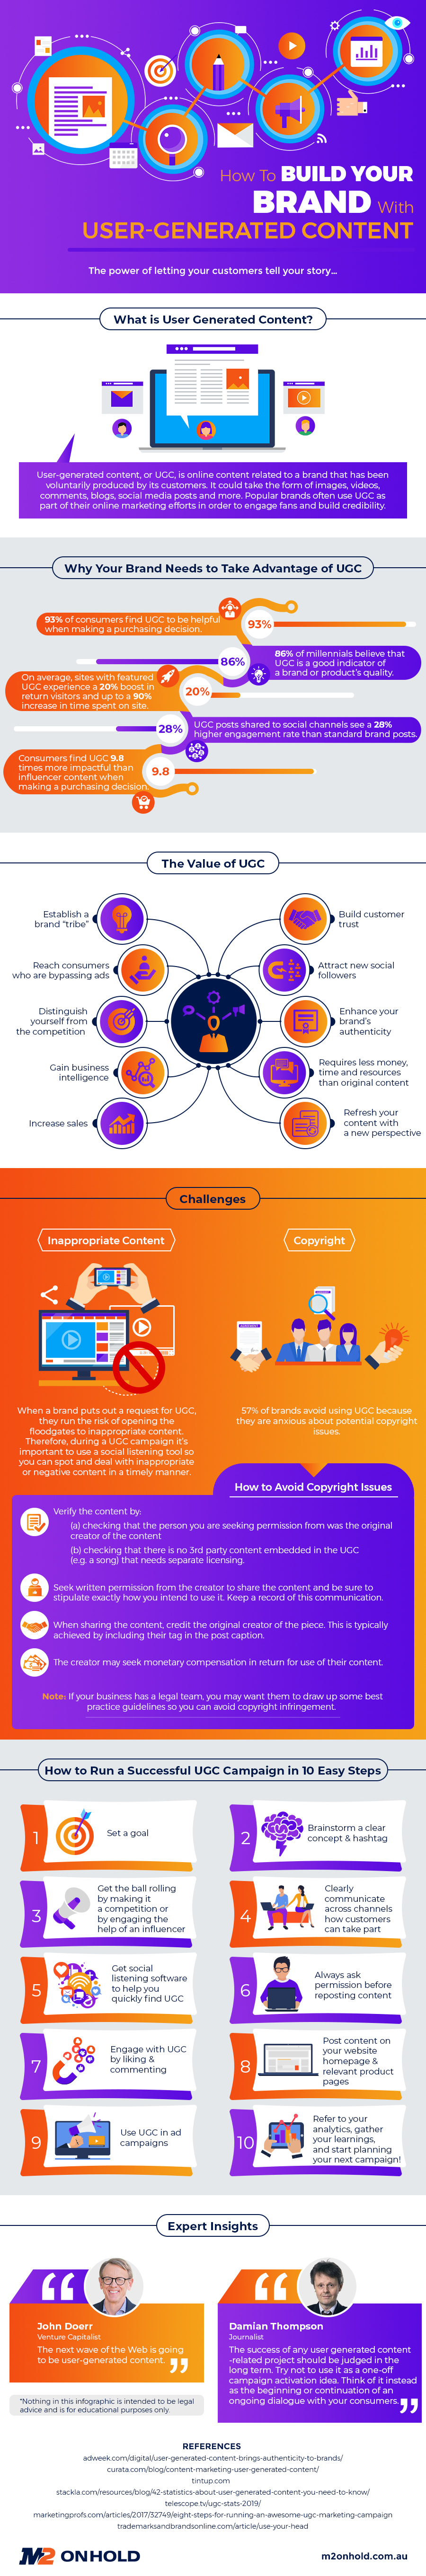 Infographic: How to Build Your Brand with UGC Marketing